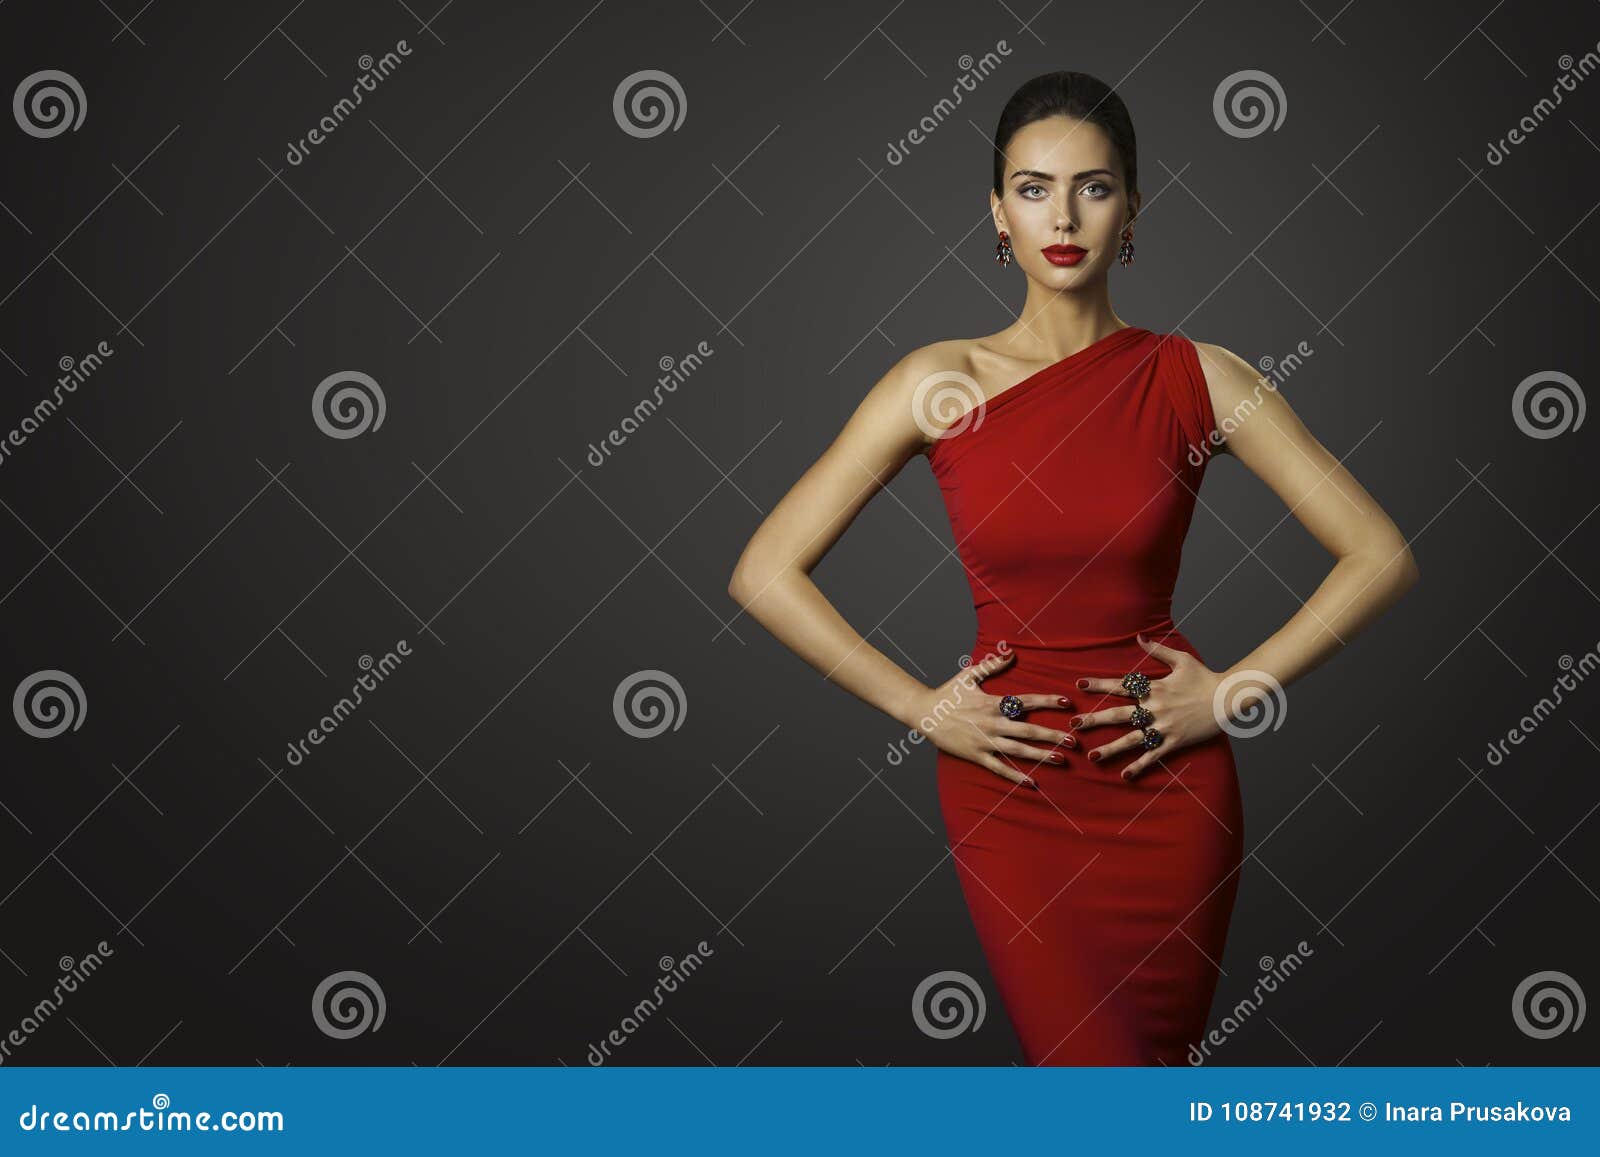 fashion model red dress, elegant woman in evening gown